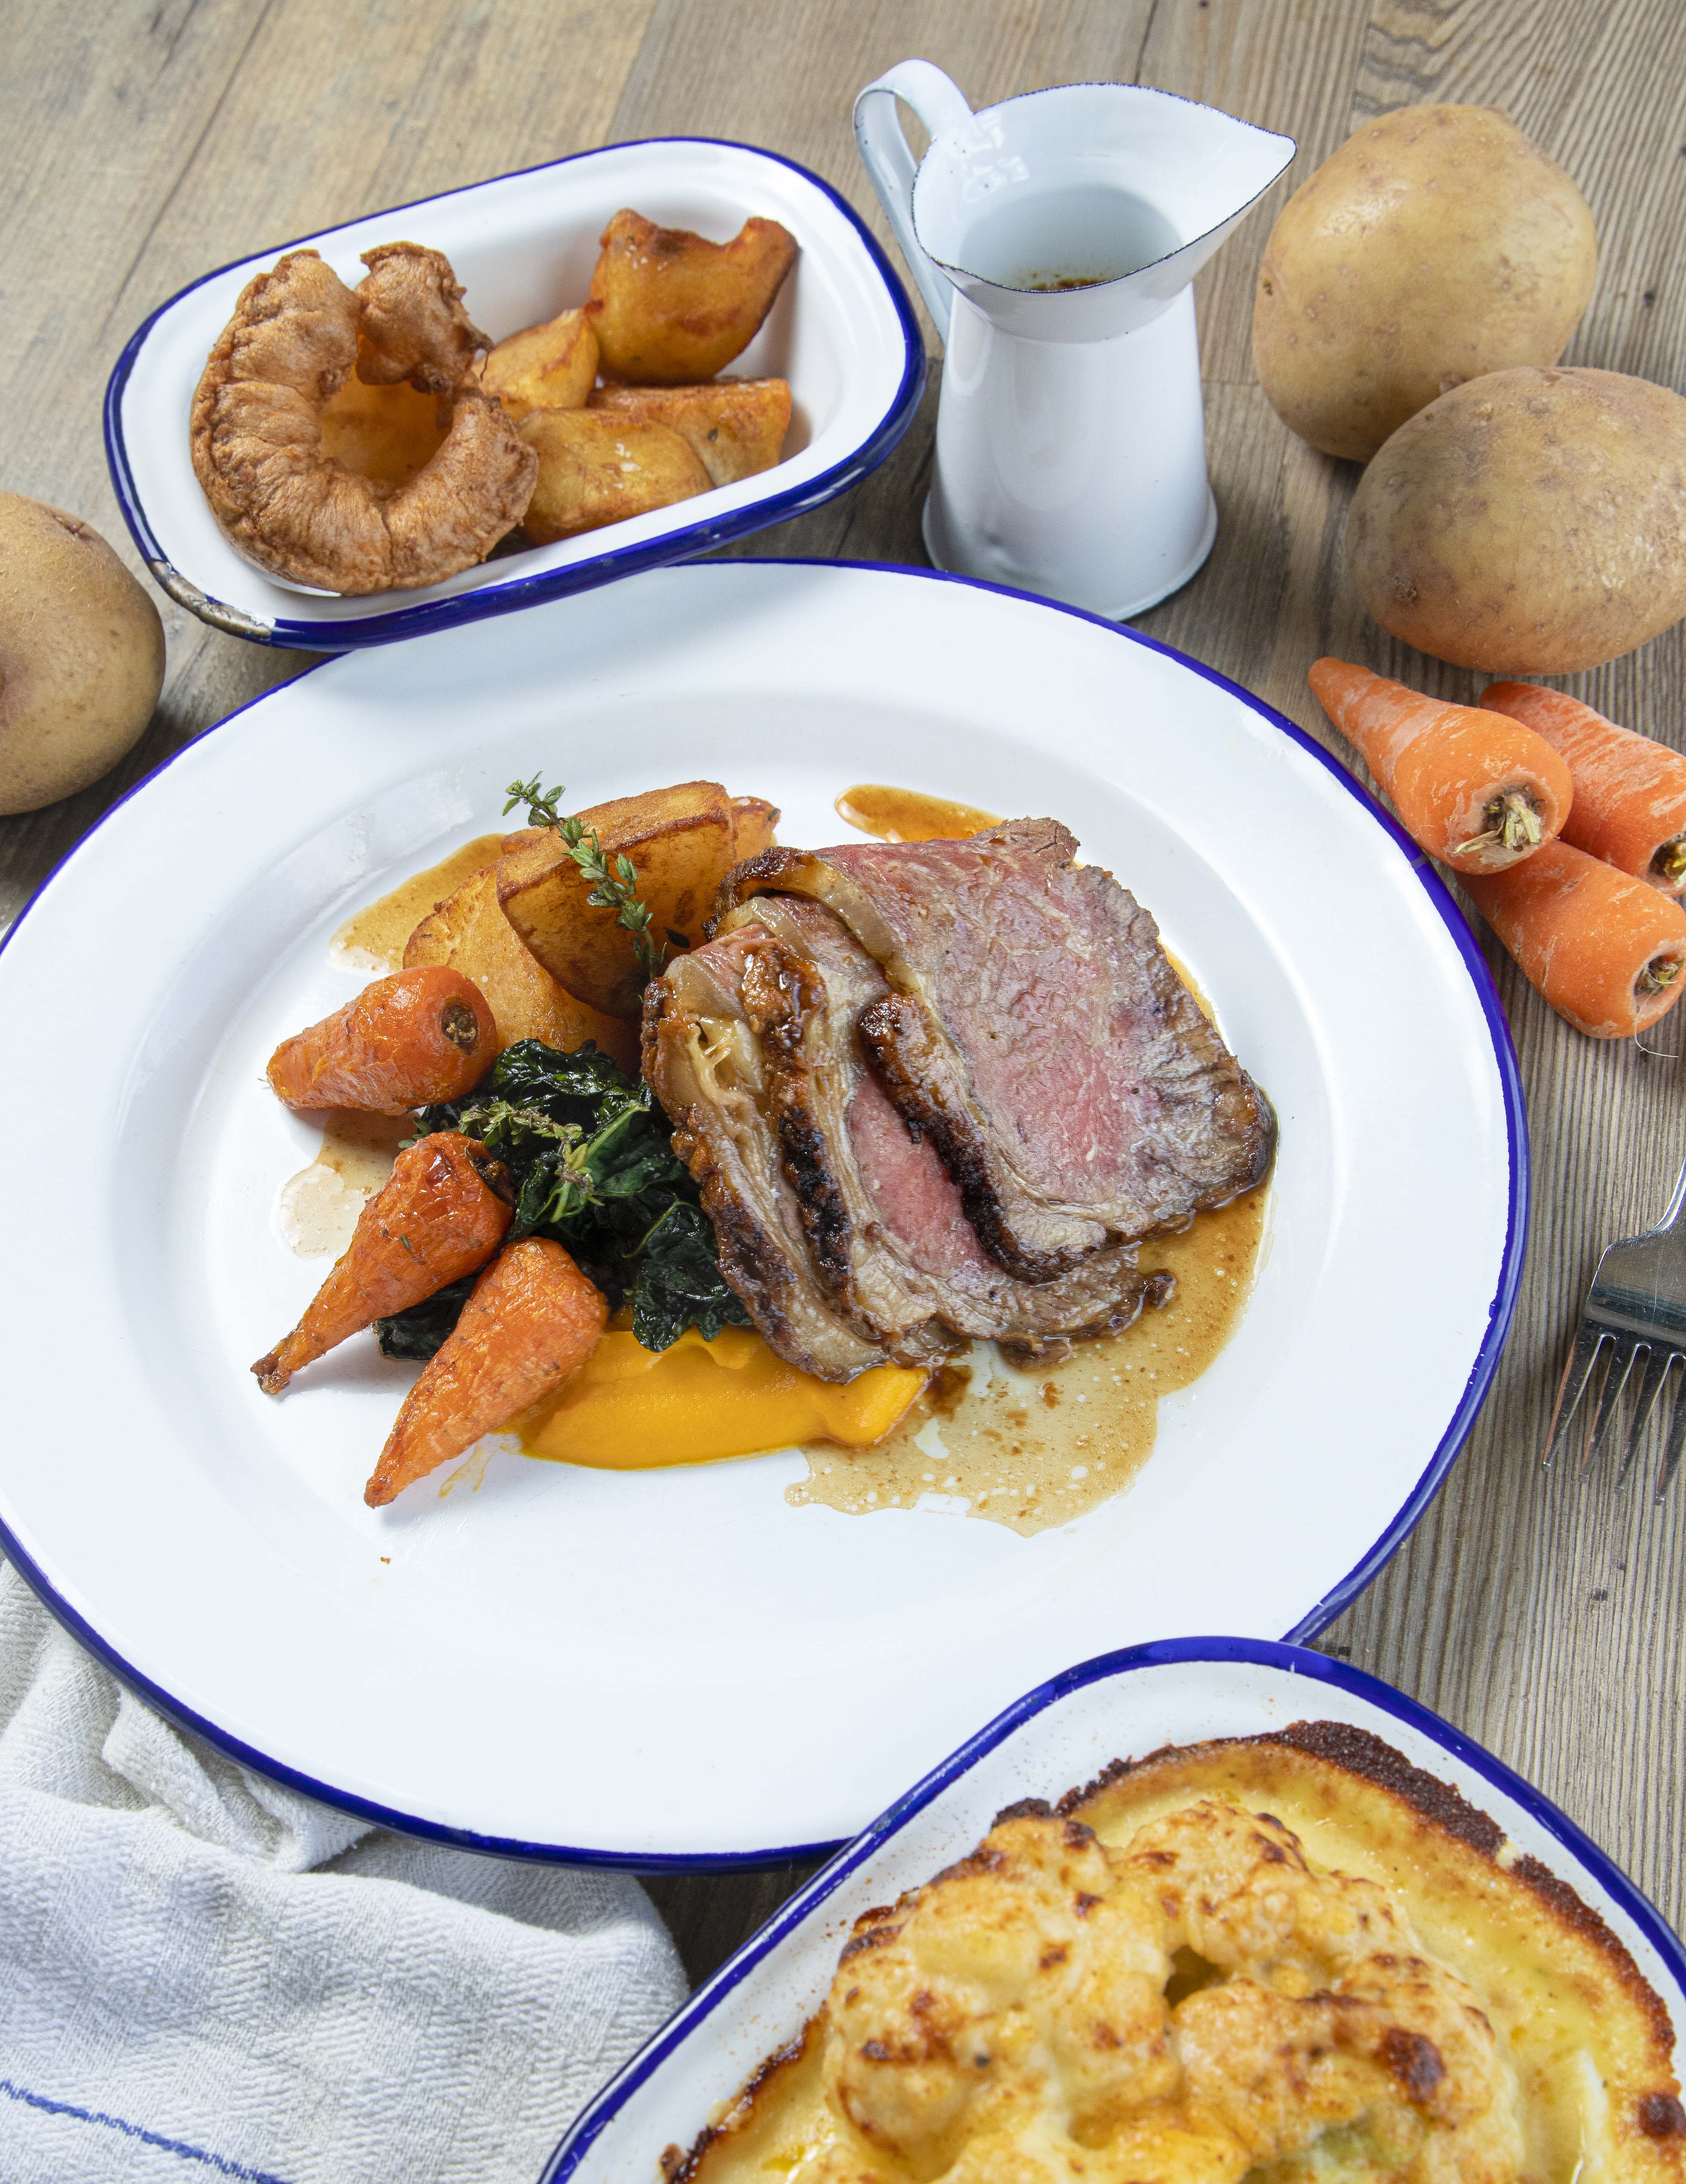 The Exeter Arms provides what Nigel promises is a ‘really good’ Sunday lunch.